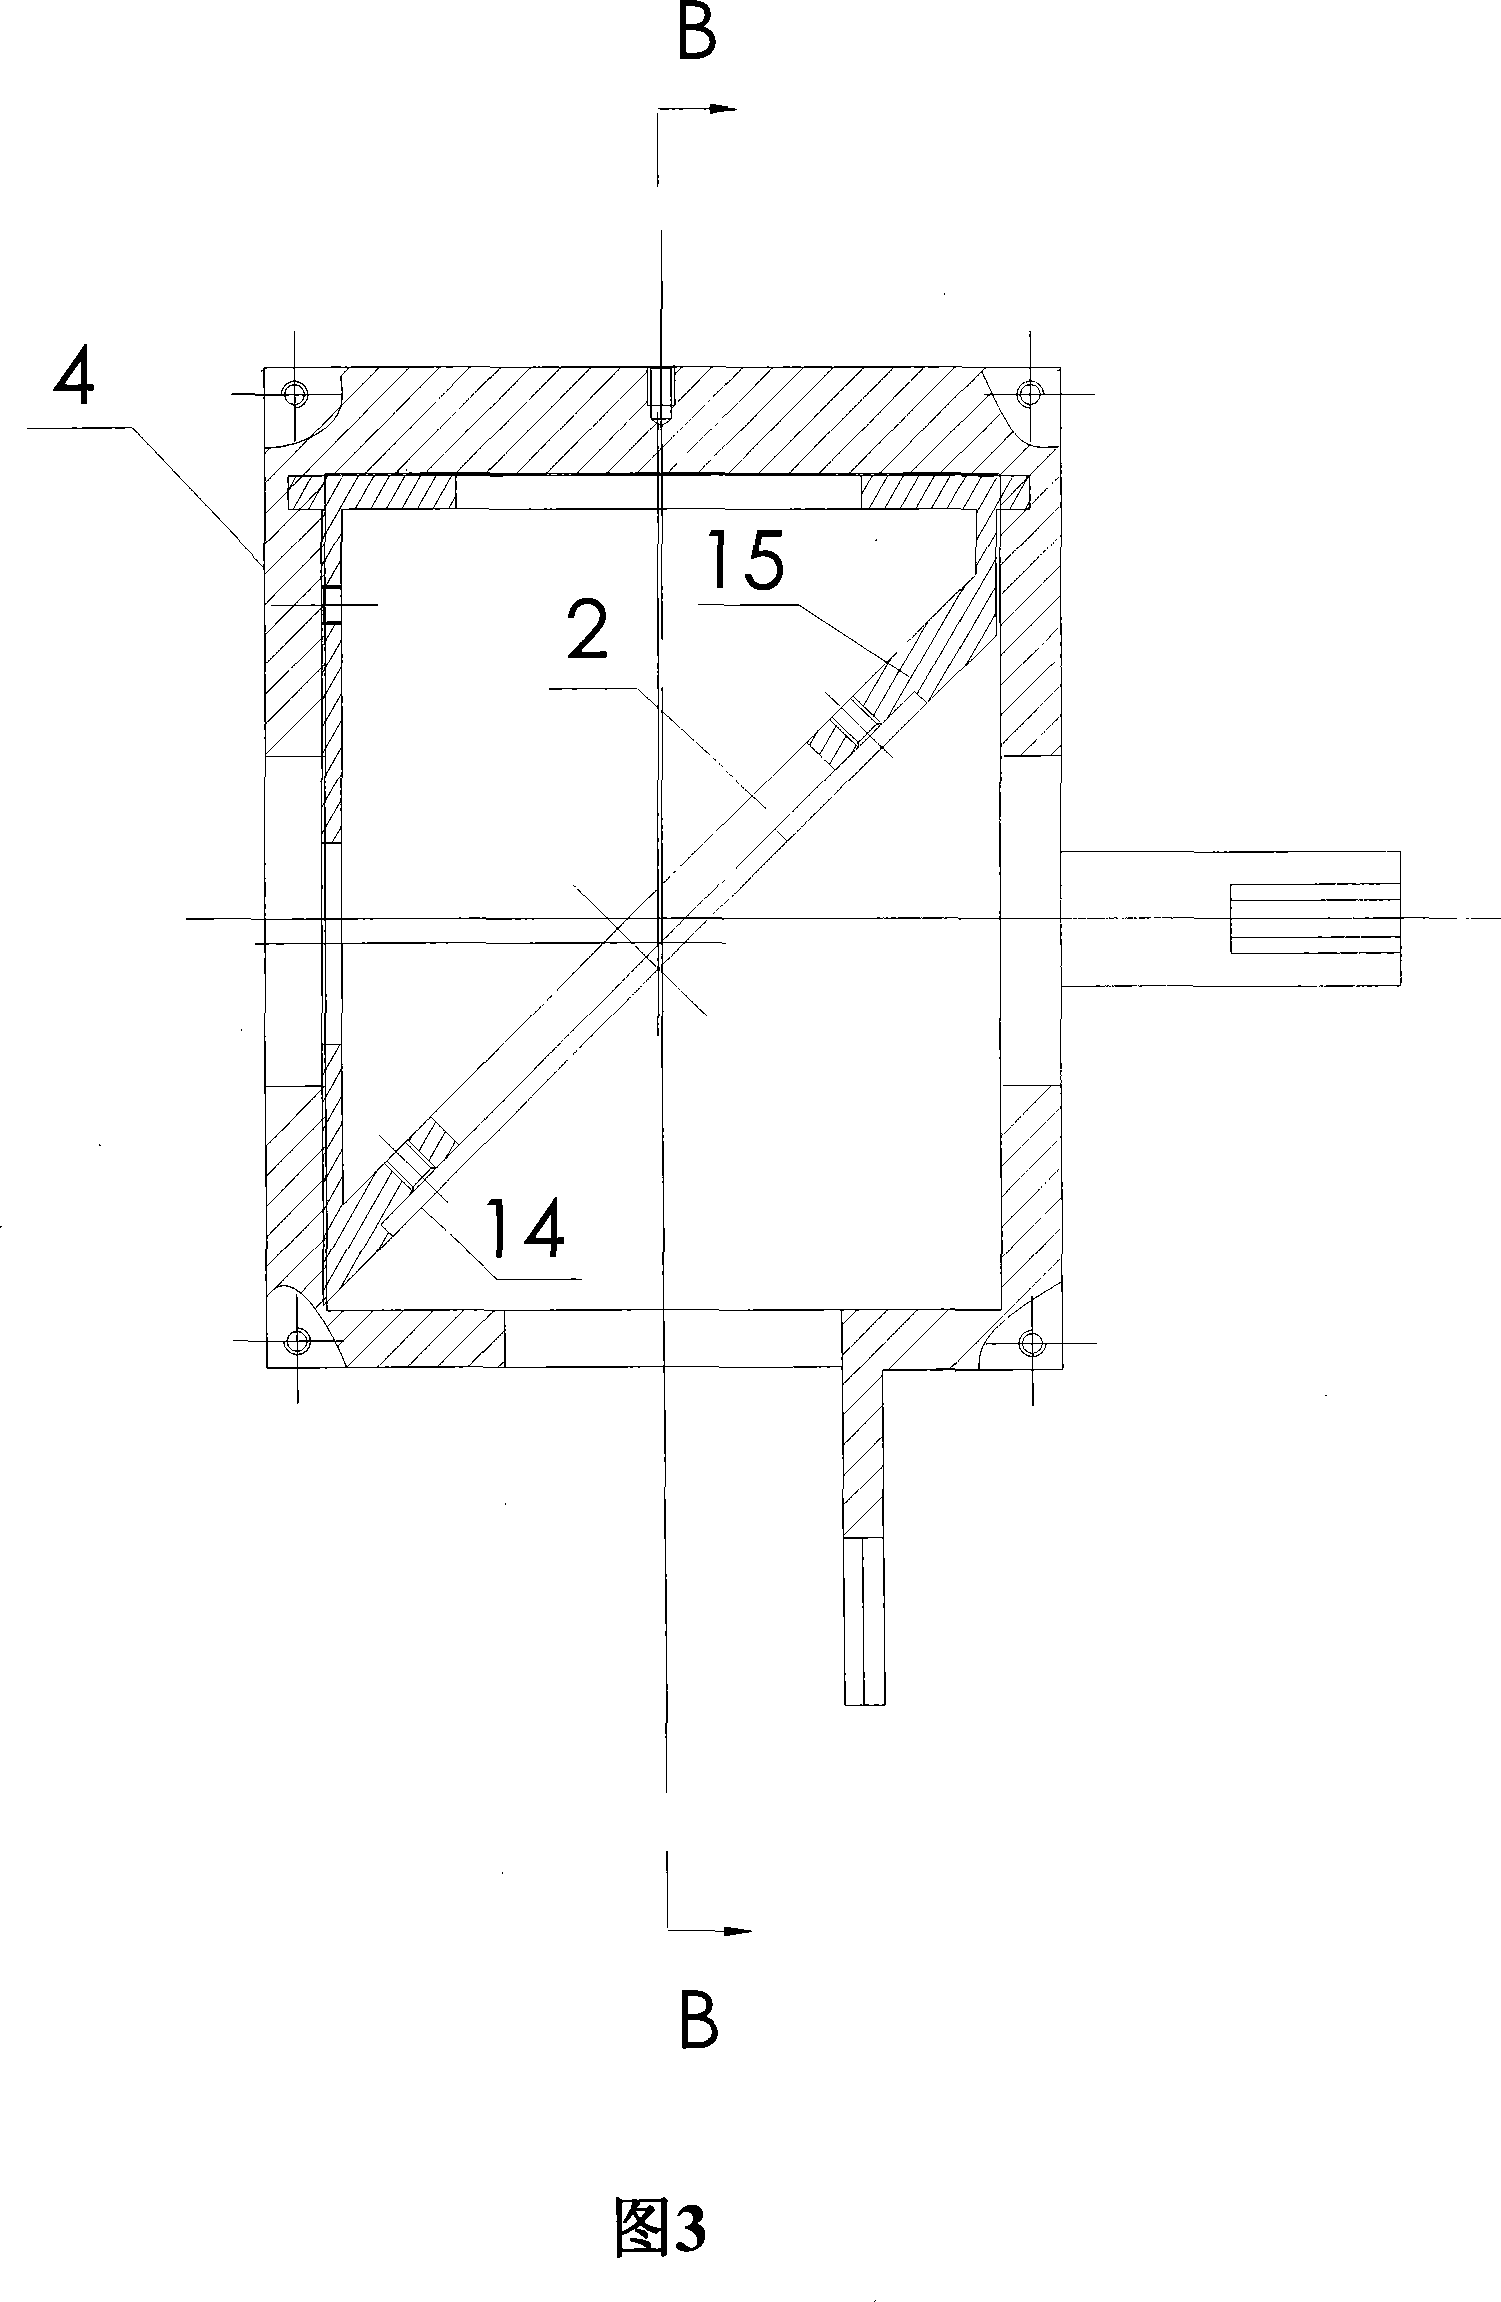 Real time monitoring device of the three-dimensional laser beam welding and incising process